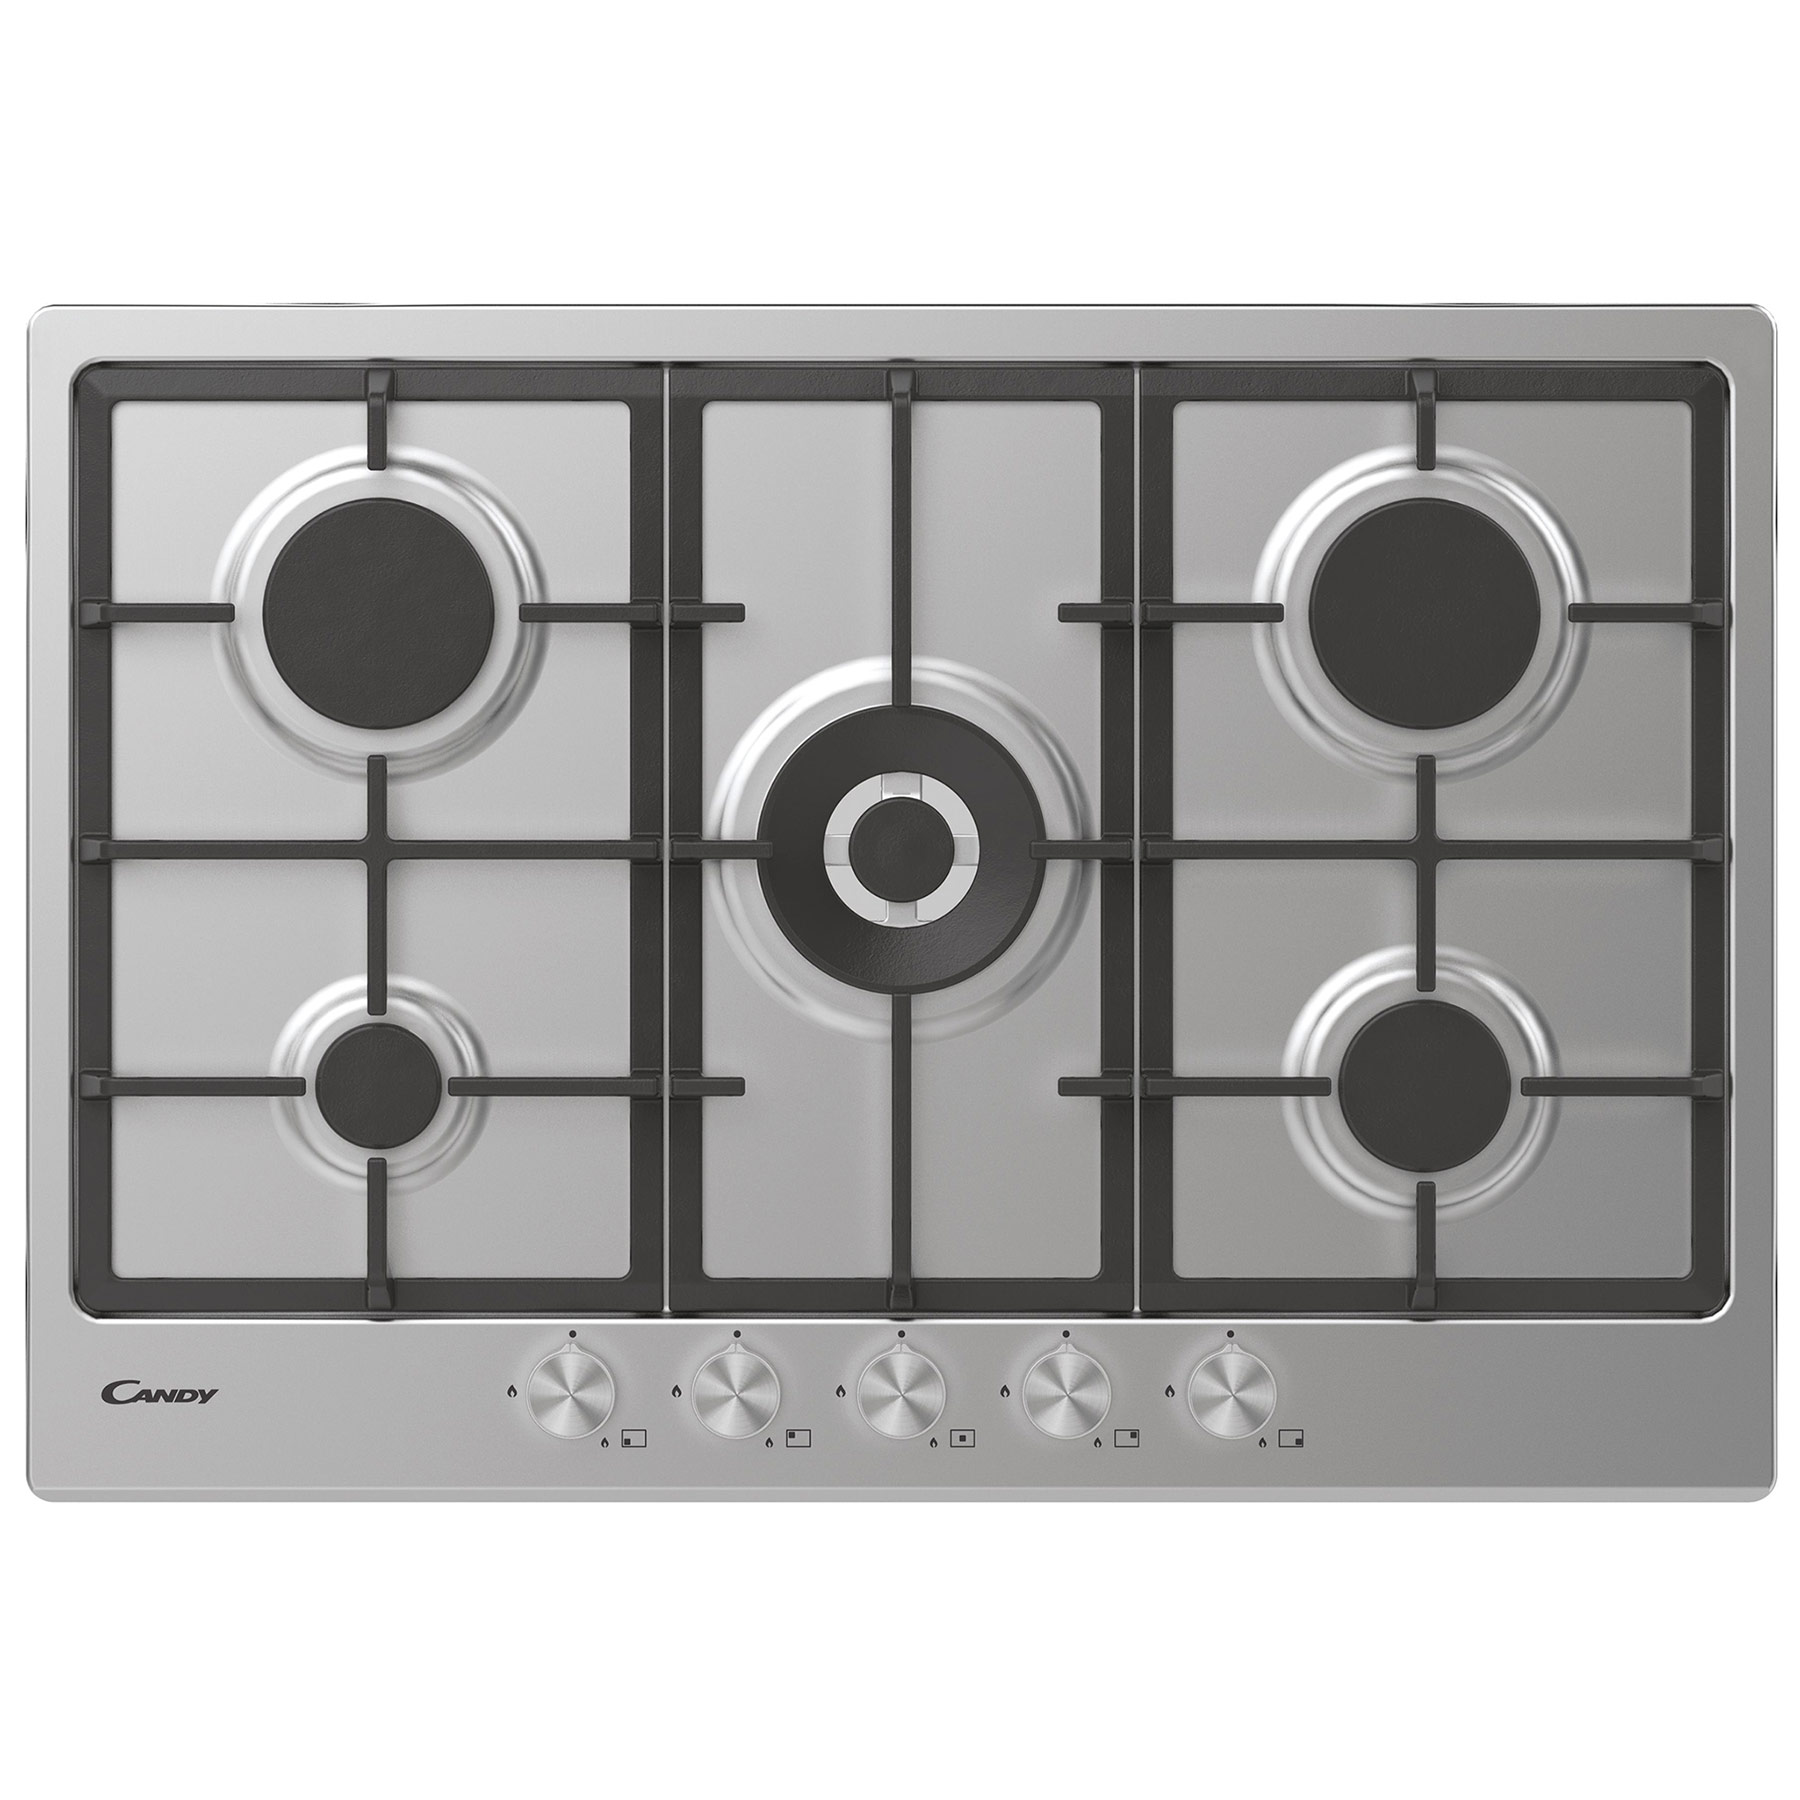 Image of Candy CHG74WPX 75cm 5 Burner Gas Hob is St Steel Double Ring Burner